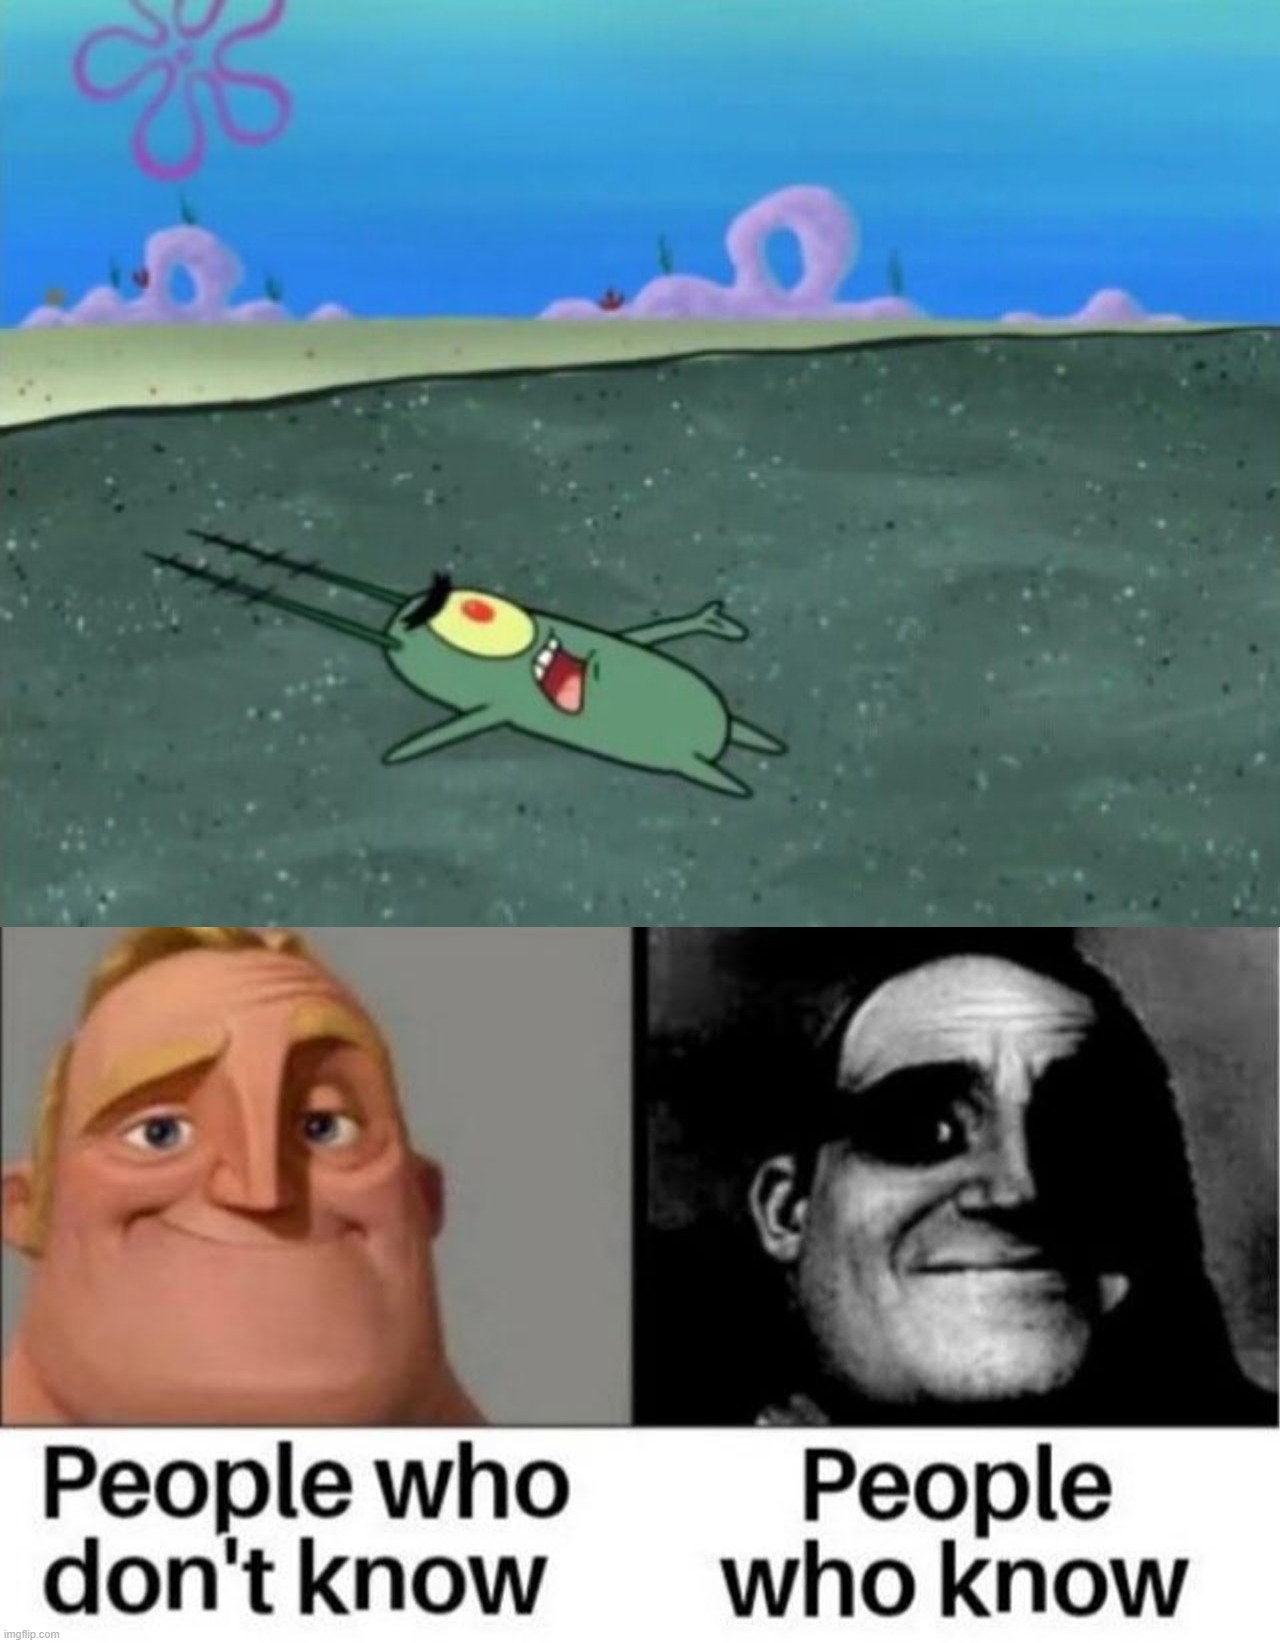 Plankton Got Served | image tagged in people who don't know / people who know meme | made w/ Imgflip meme maker